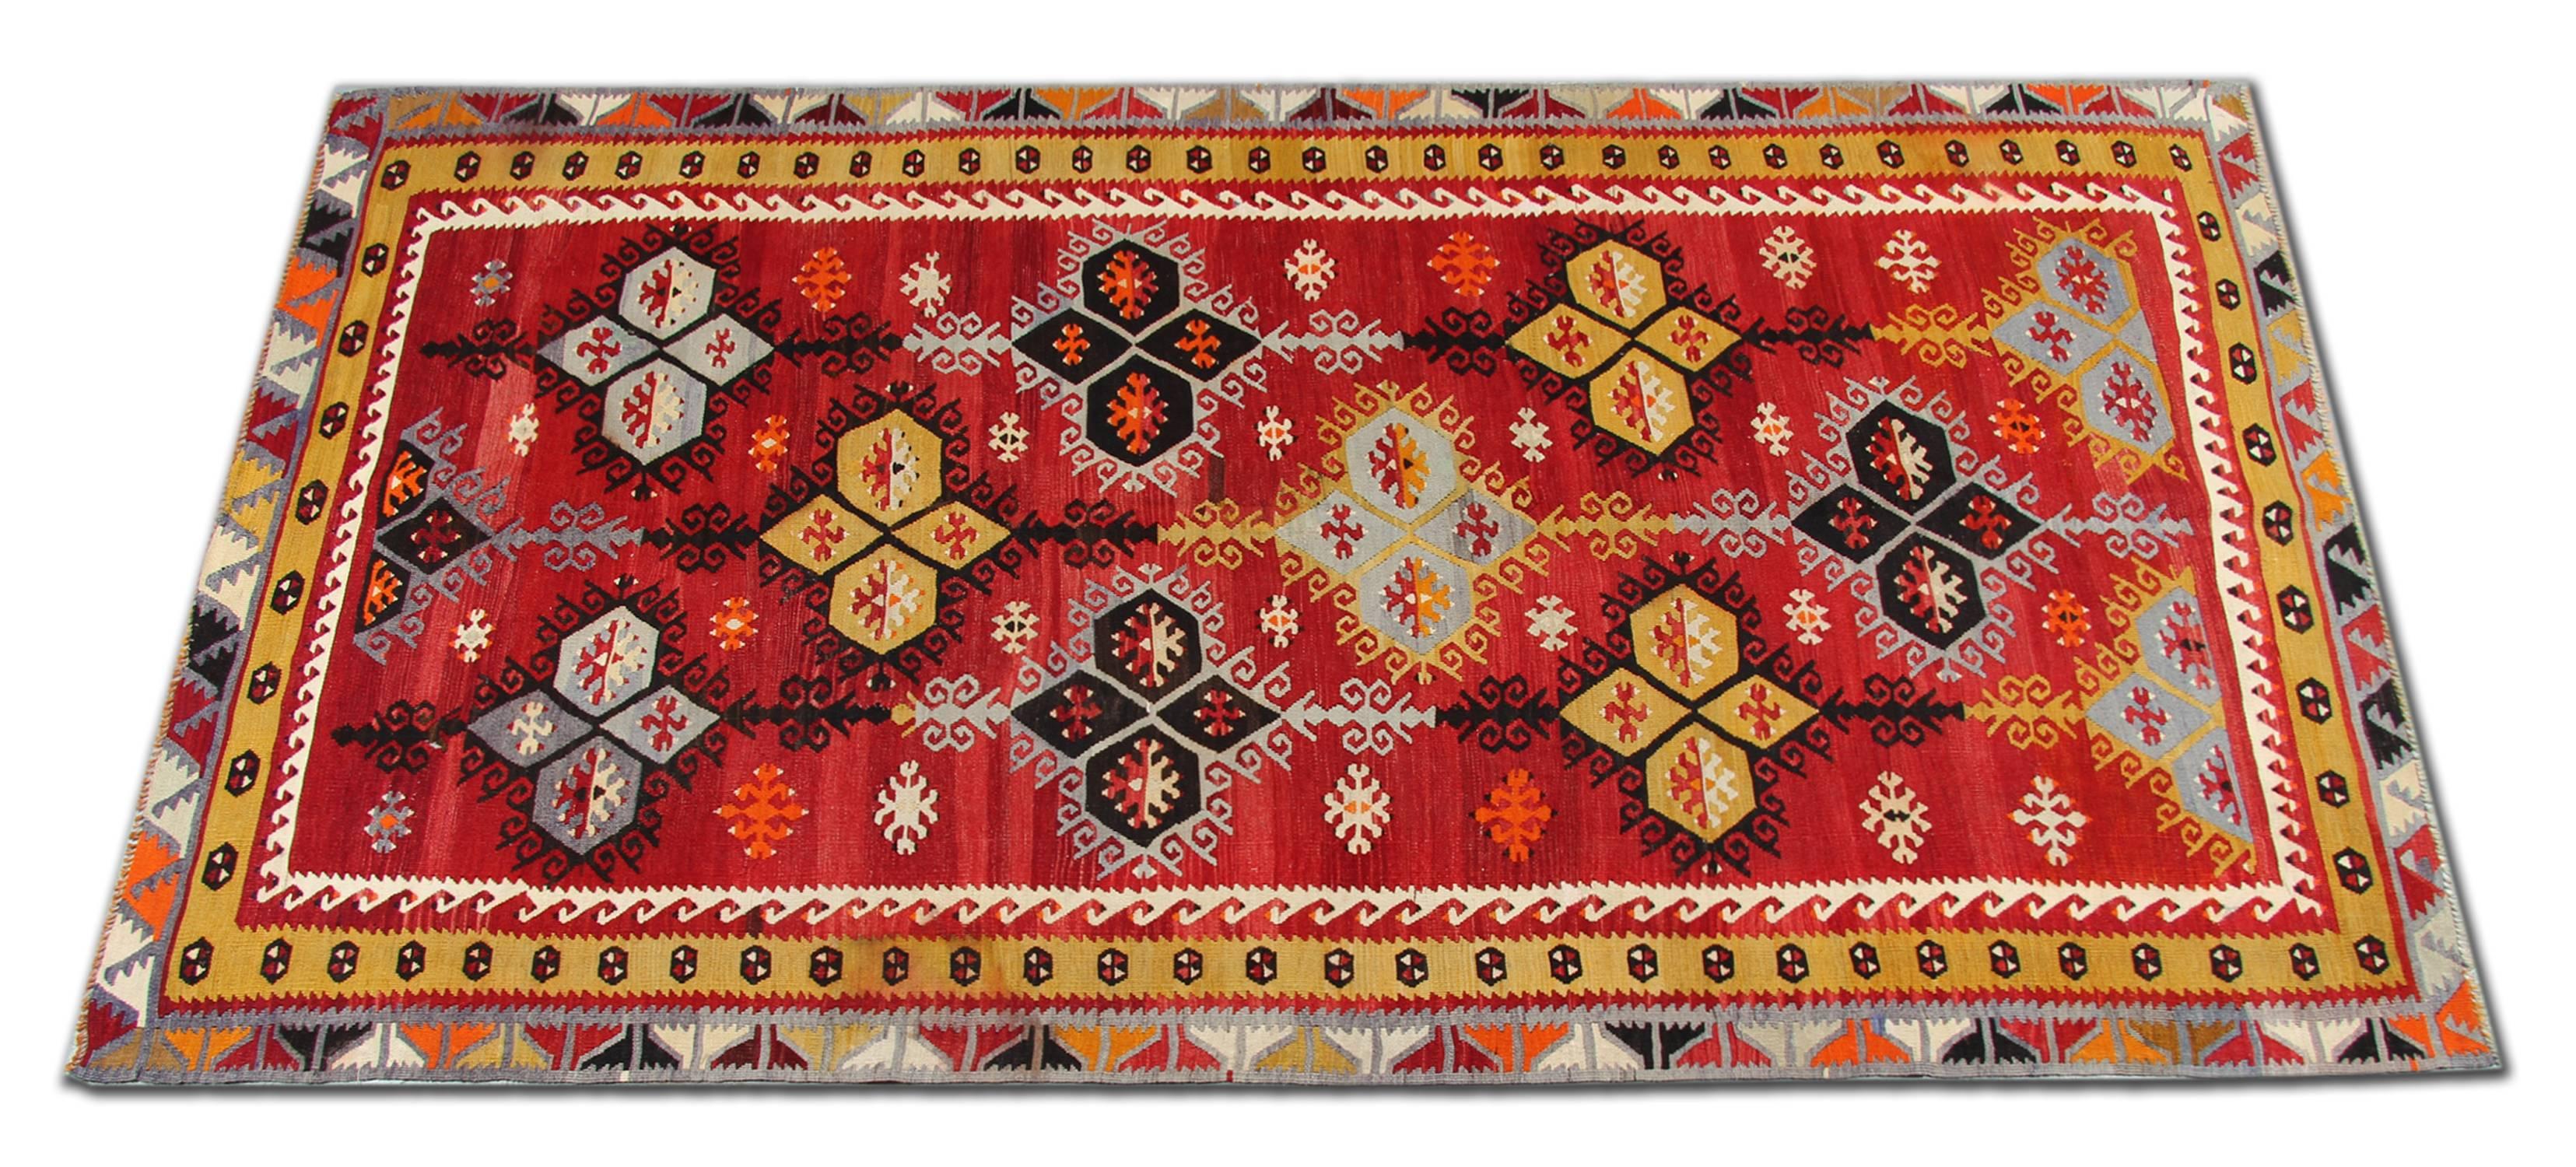 The handmade carpet Sarkilsa Kilim rugs are one of the most decorative rugs, Turkish Kilim can be an additional element of design to one's home decor. 
Most oriental rug Kilims can always be in harmony with the interior and will be complementary